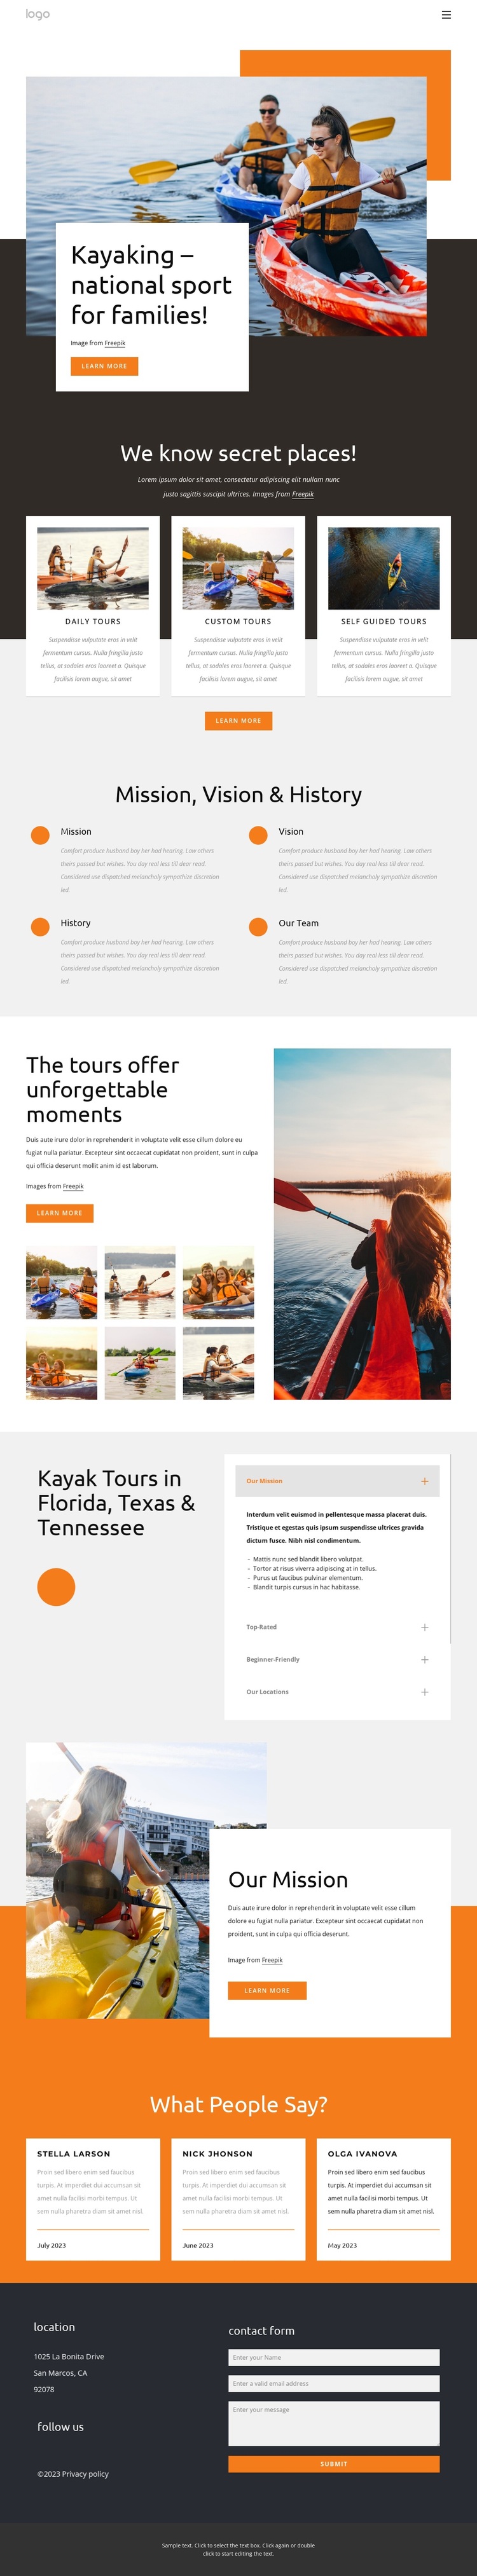 Kayaking - national sport for families Template